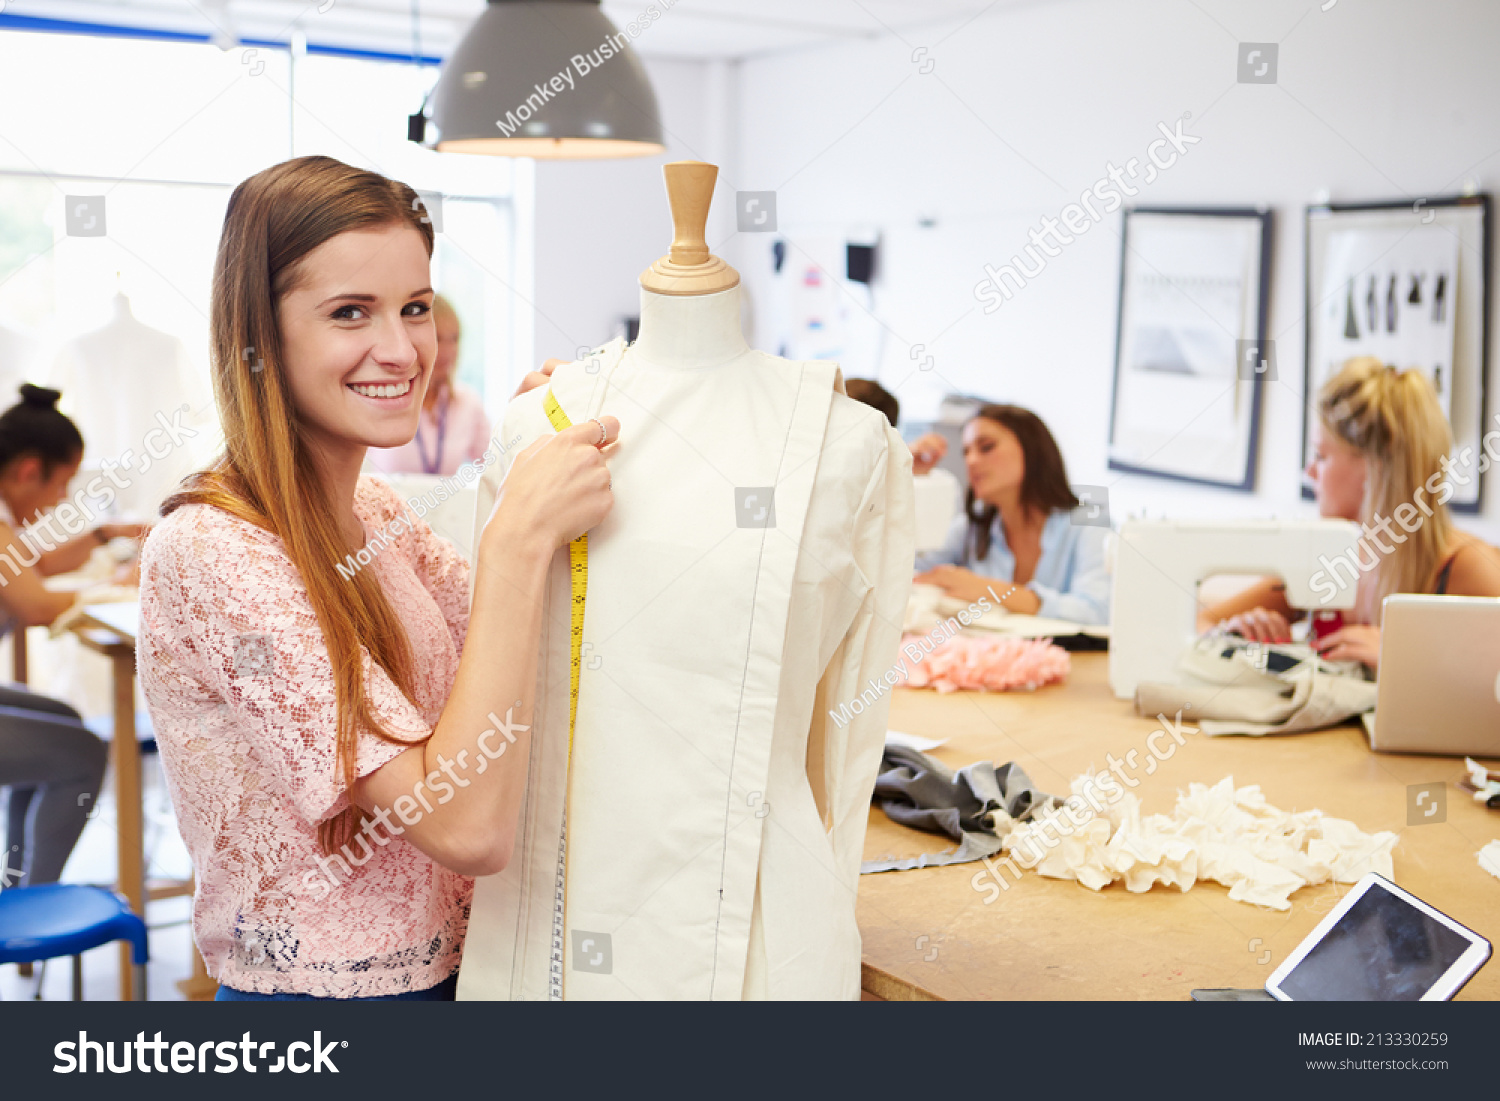 stock-photo-college-students-studying-fashion-and-design-213330259.jpg